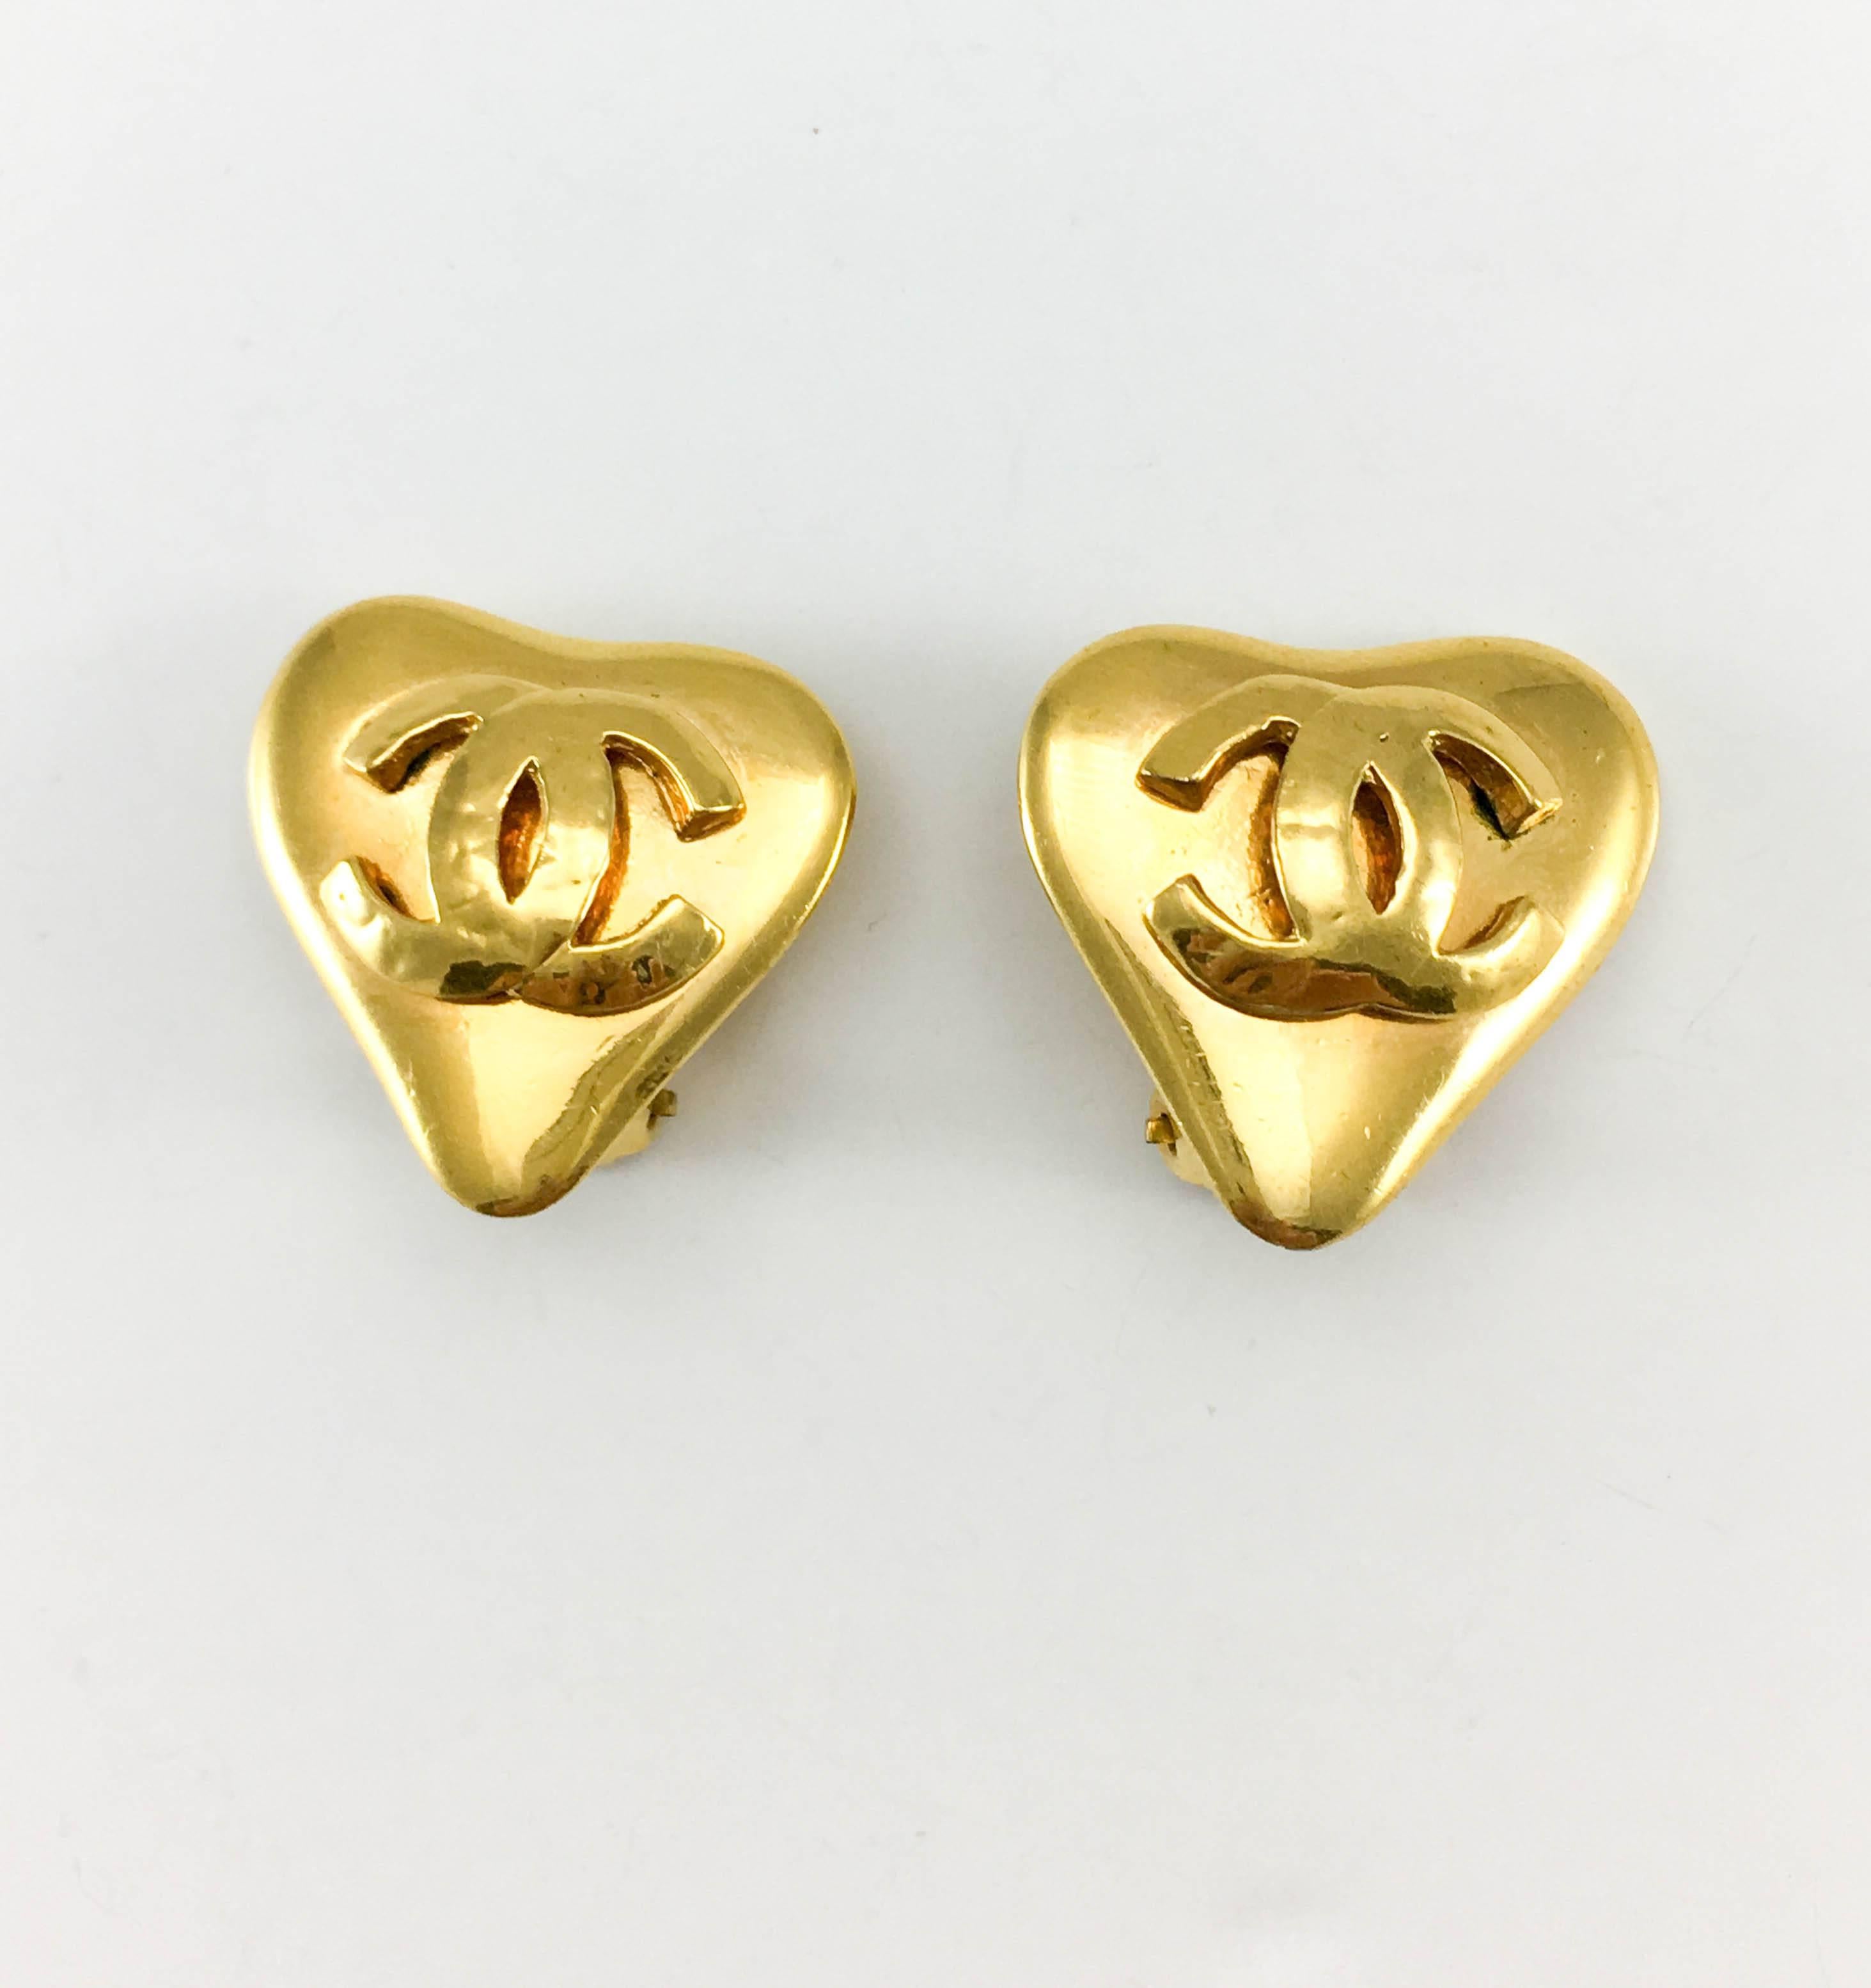 1993 Chanel Gold-Plated Heart-Shaped Logo Earrings  In Excellent Condition For Sale In London, Chelsea